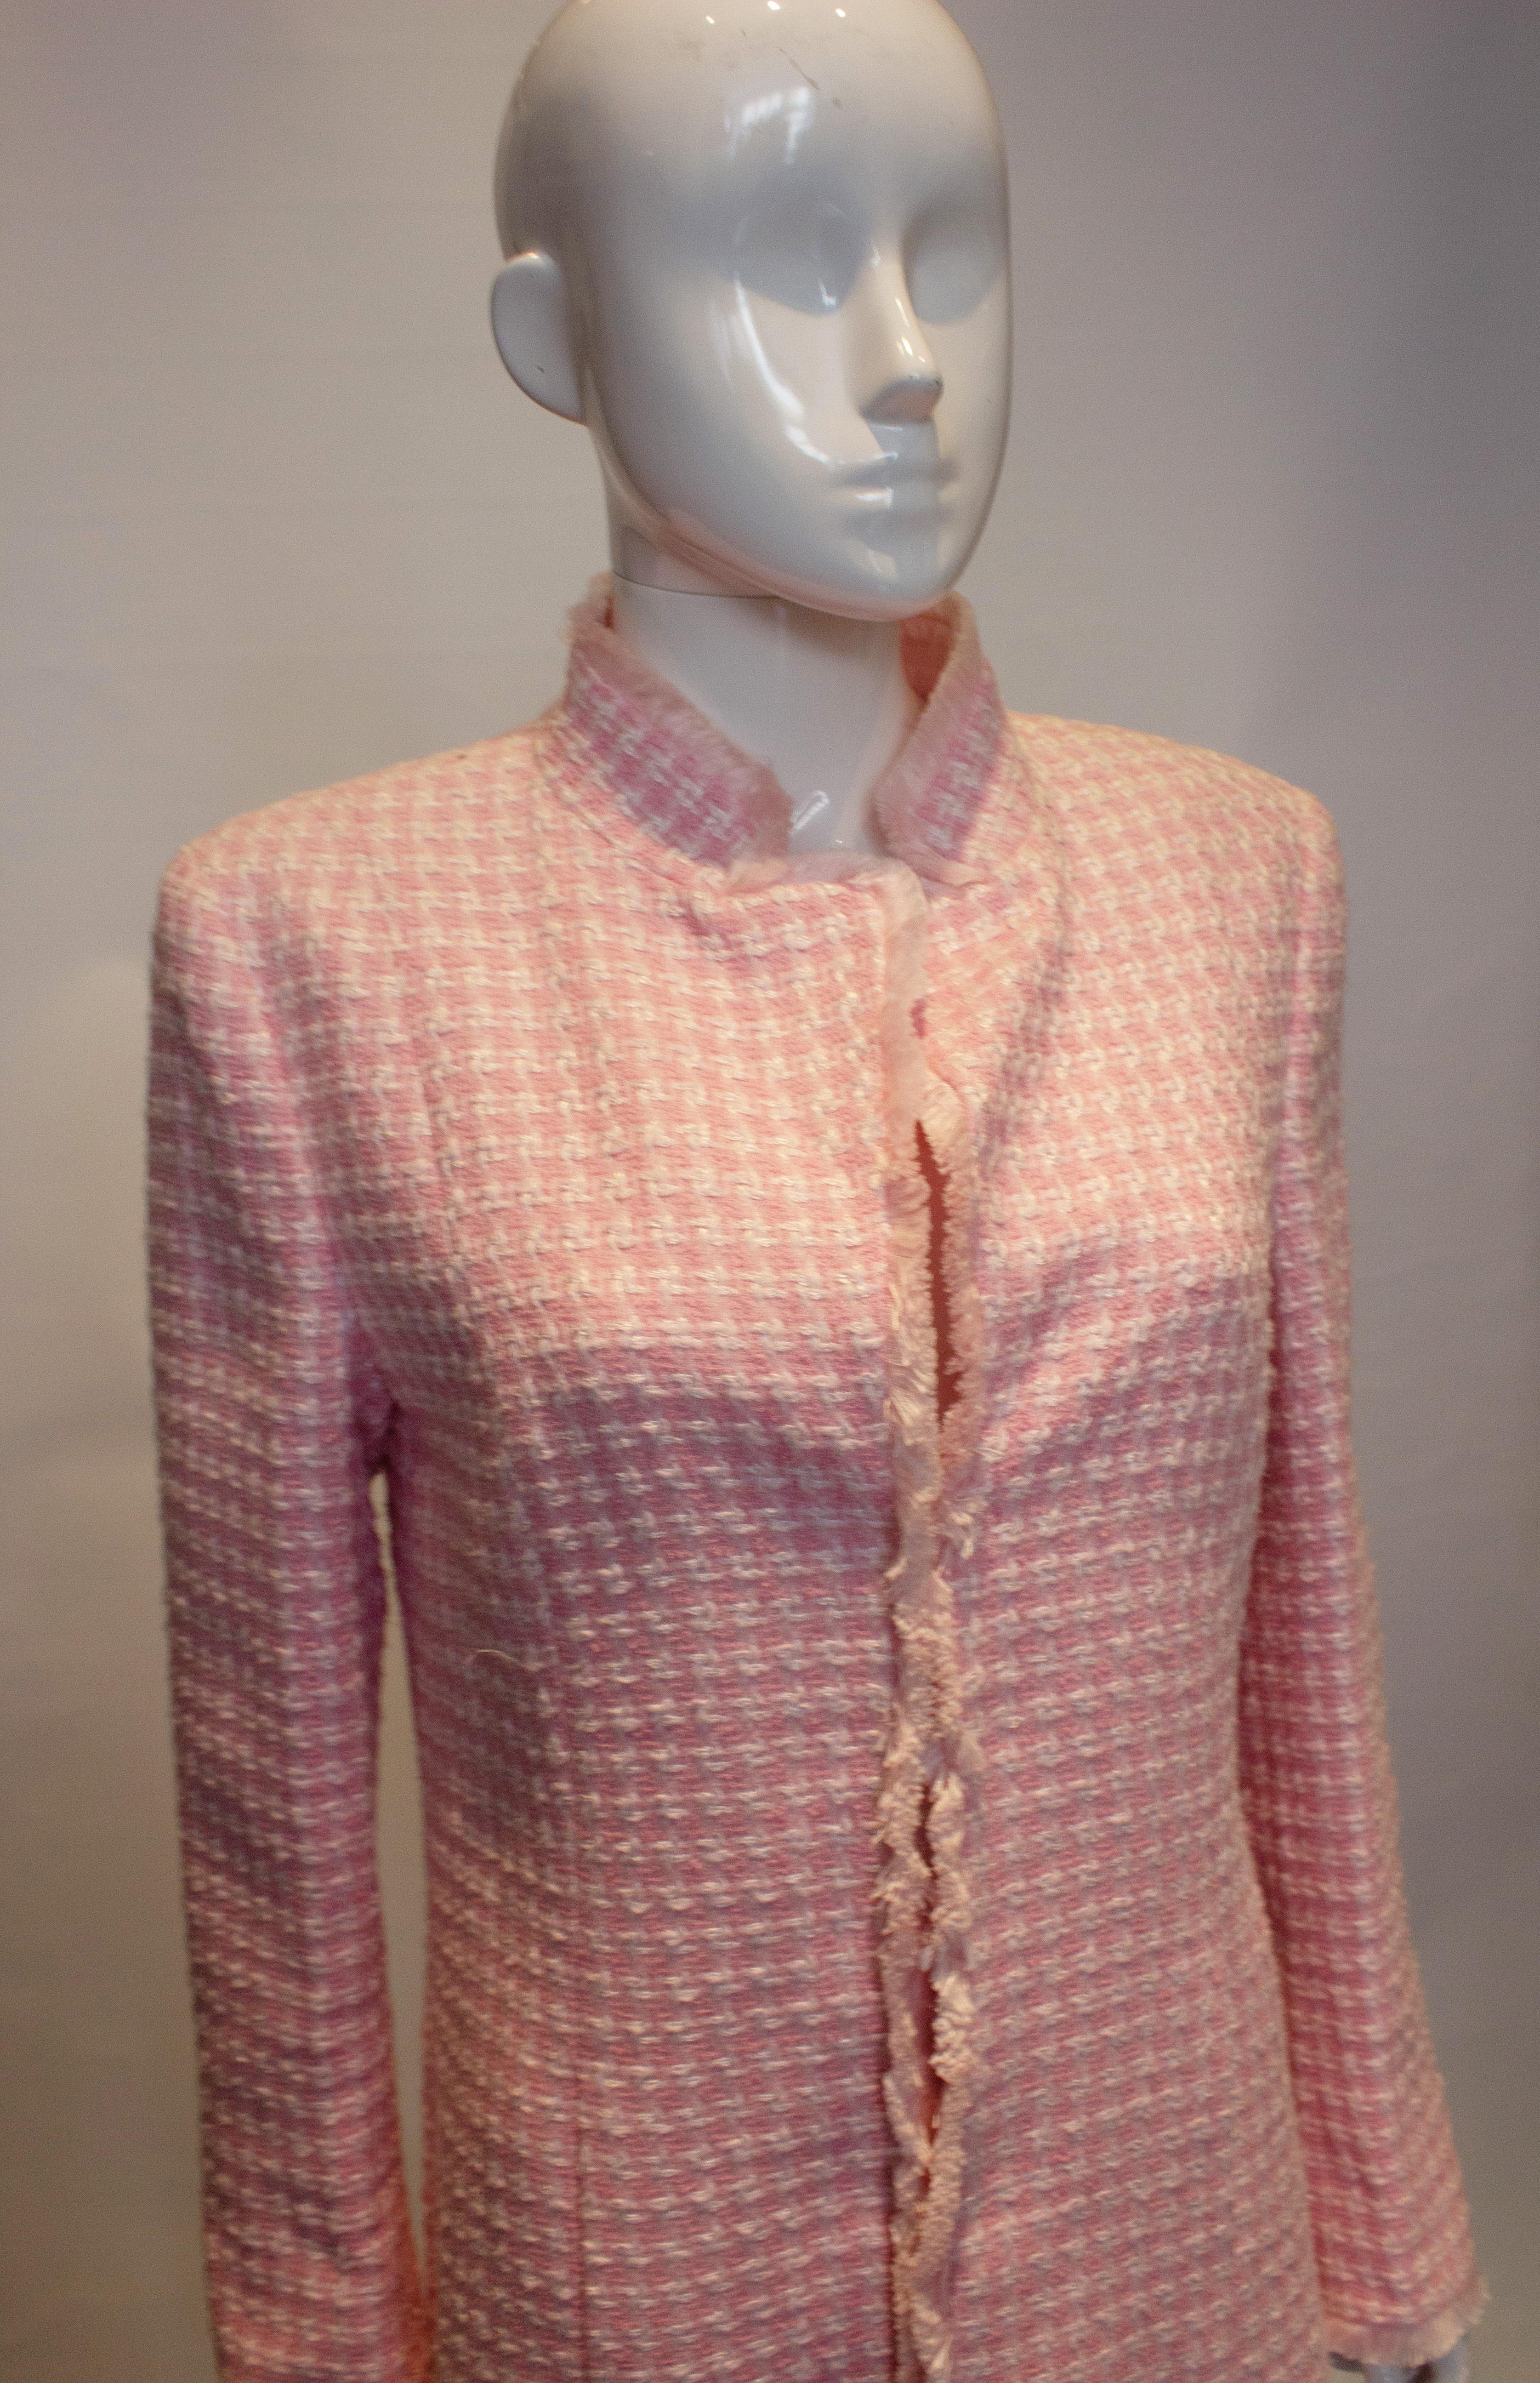 A pretty coat for Fall by Escada. The coat is in a pink and white fabric with silk lining. It has button fastening at the front, fringe detail on the front, hem and cuffs and a pocket on either side.
Marked size 38, Measurements; bust up to 39'',